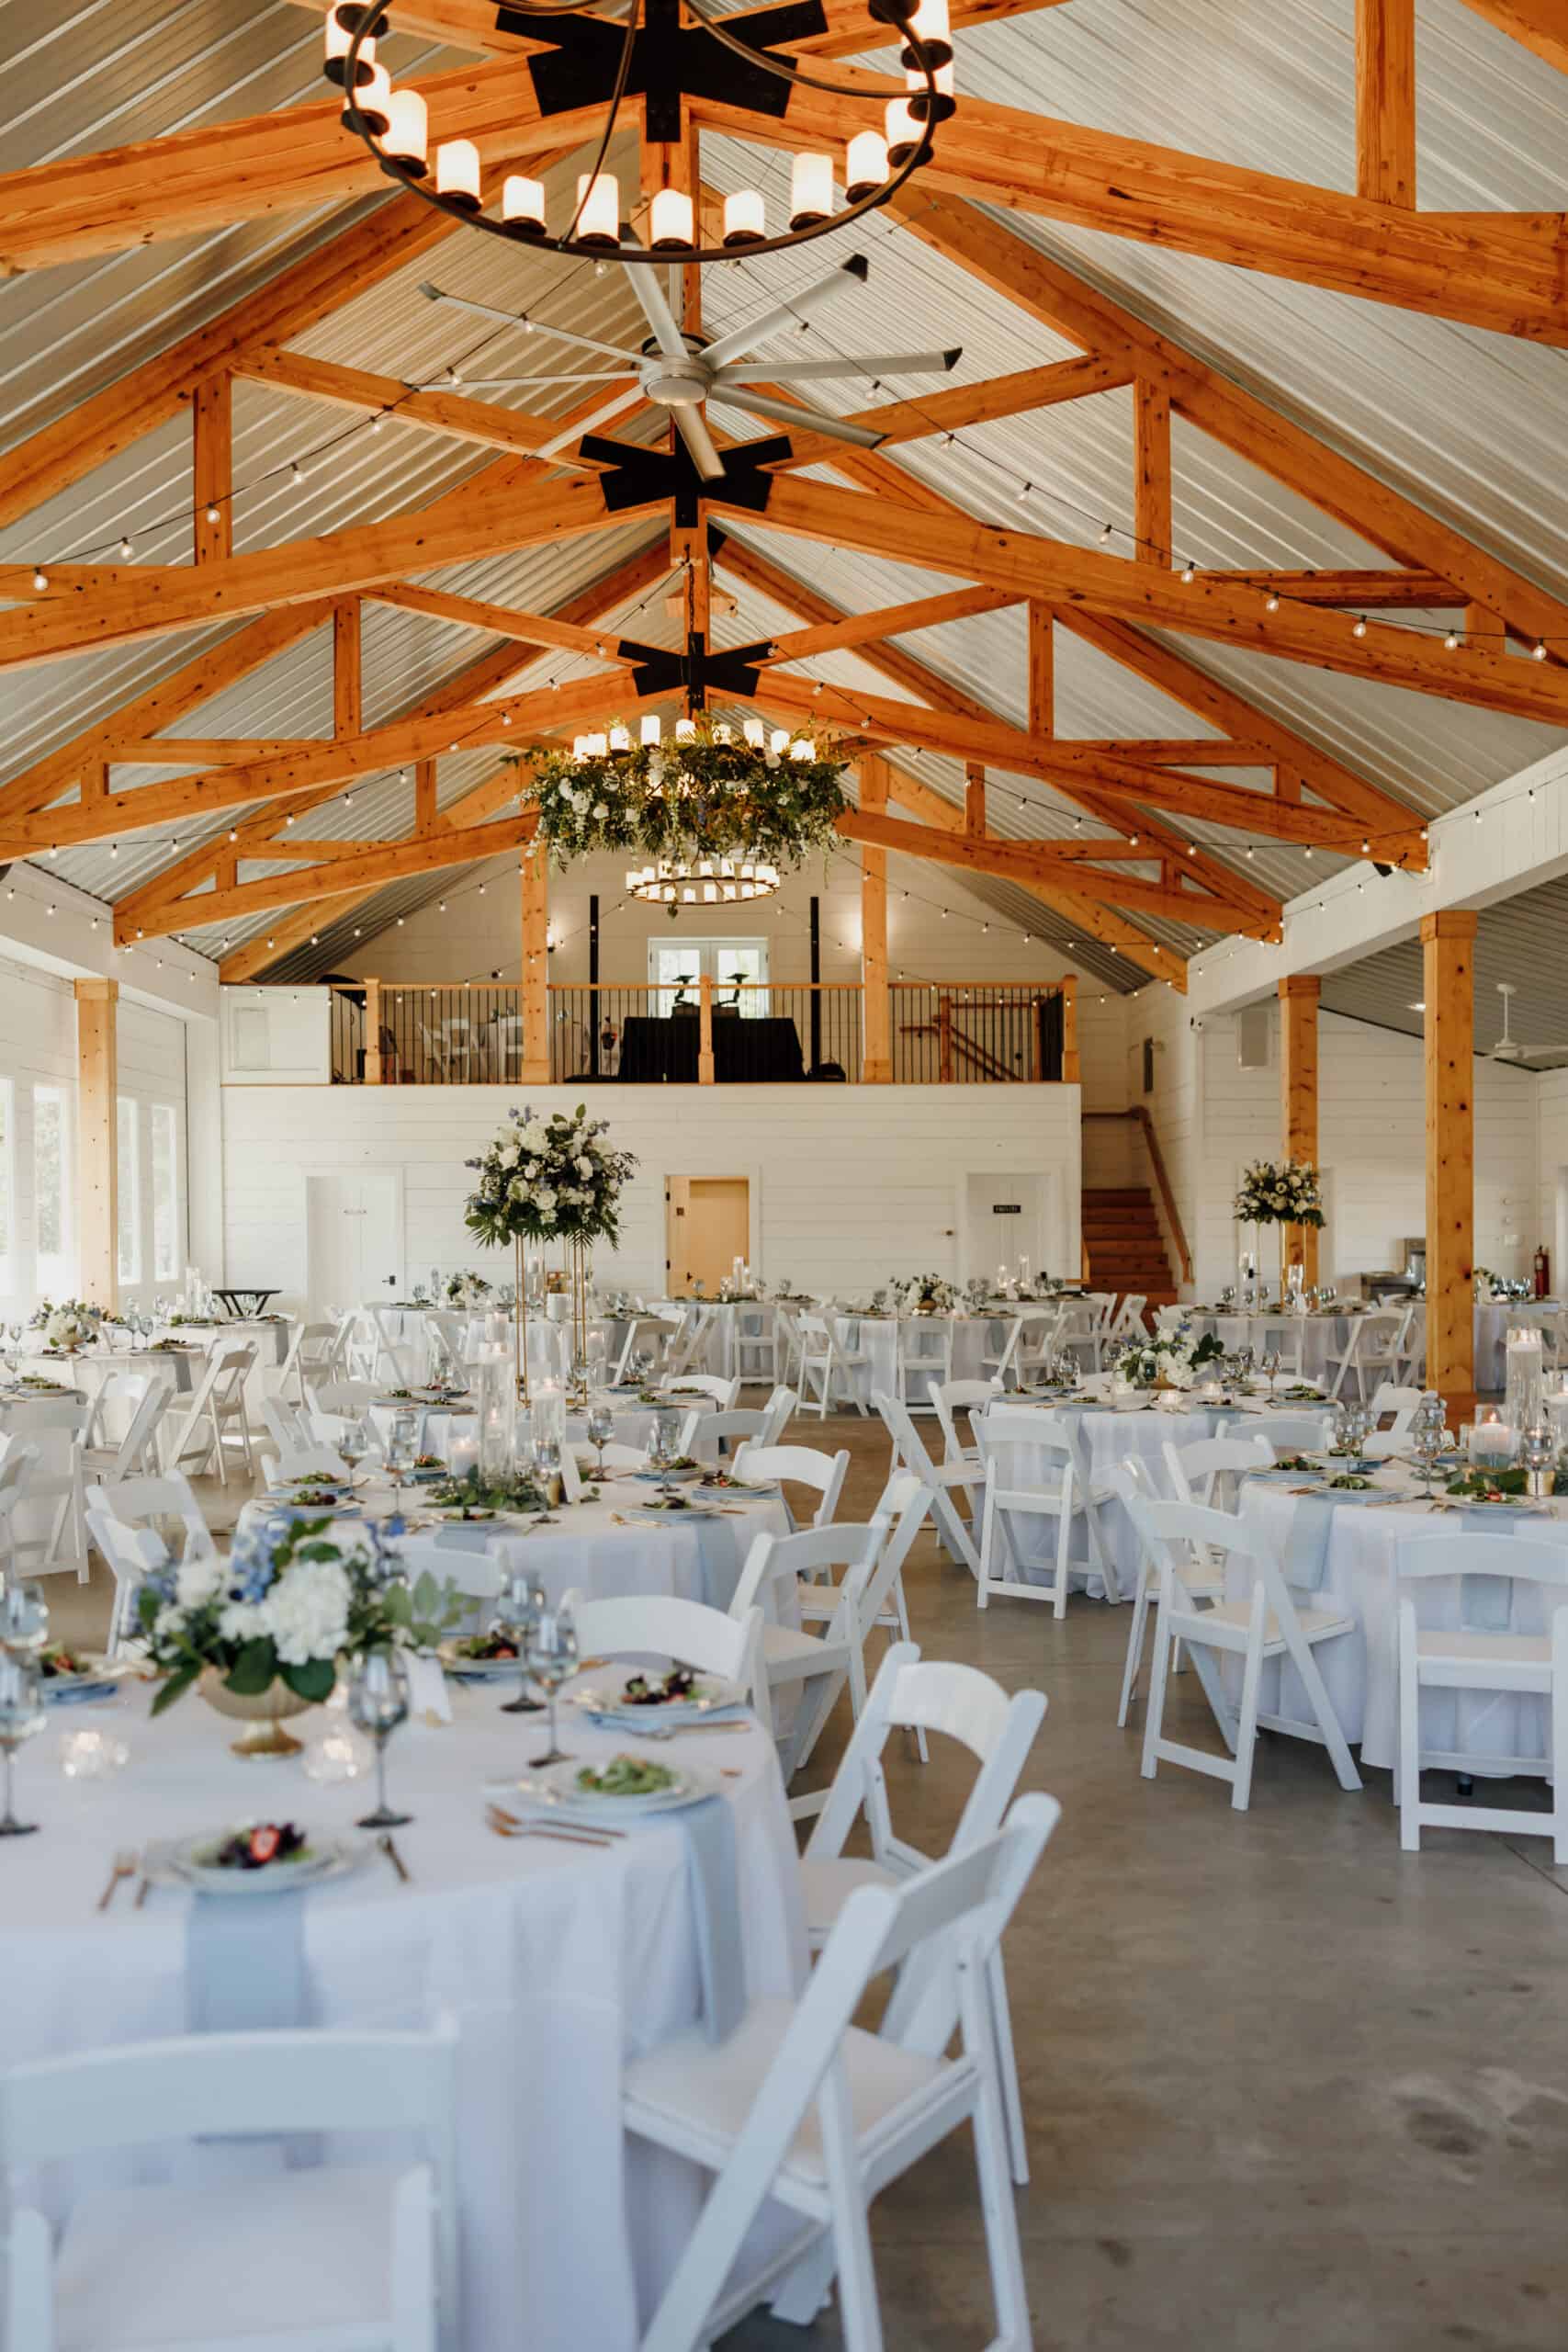 Hire Premier Party Planners For Your Walnut Hill Wedding